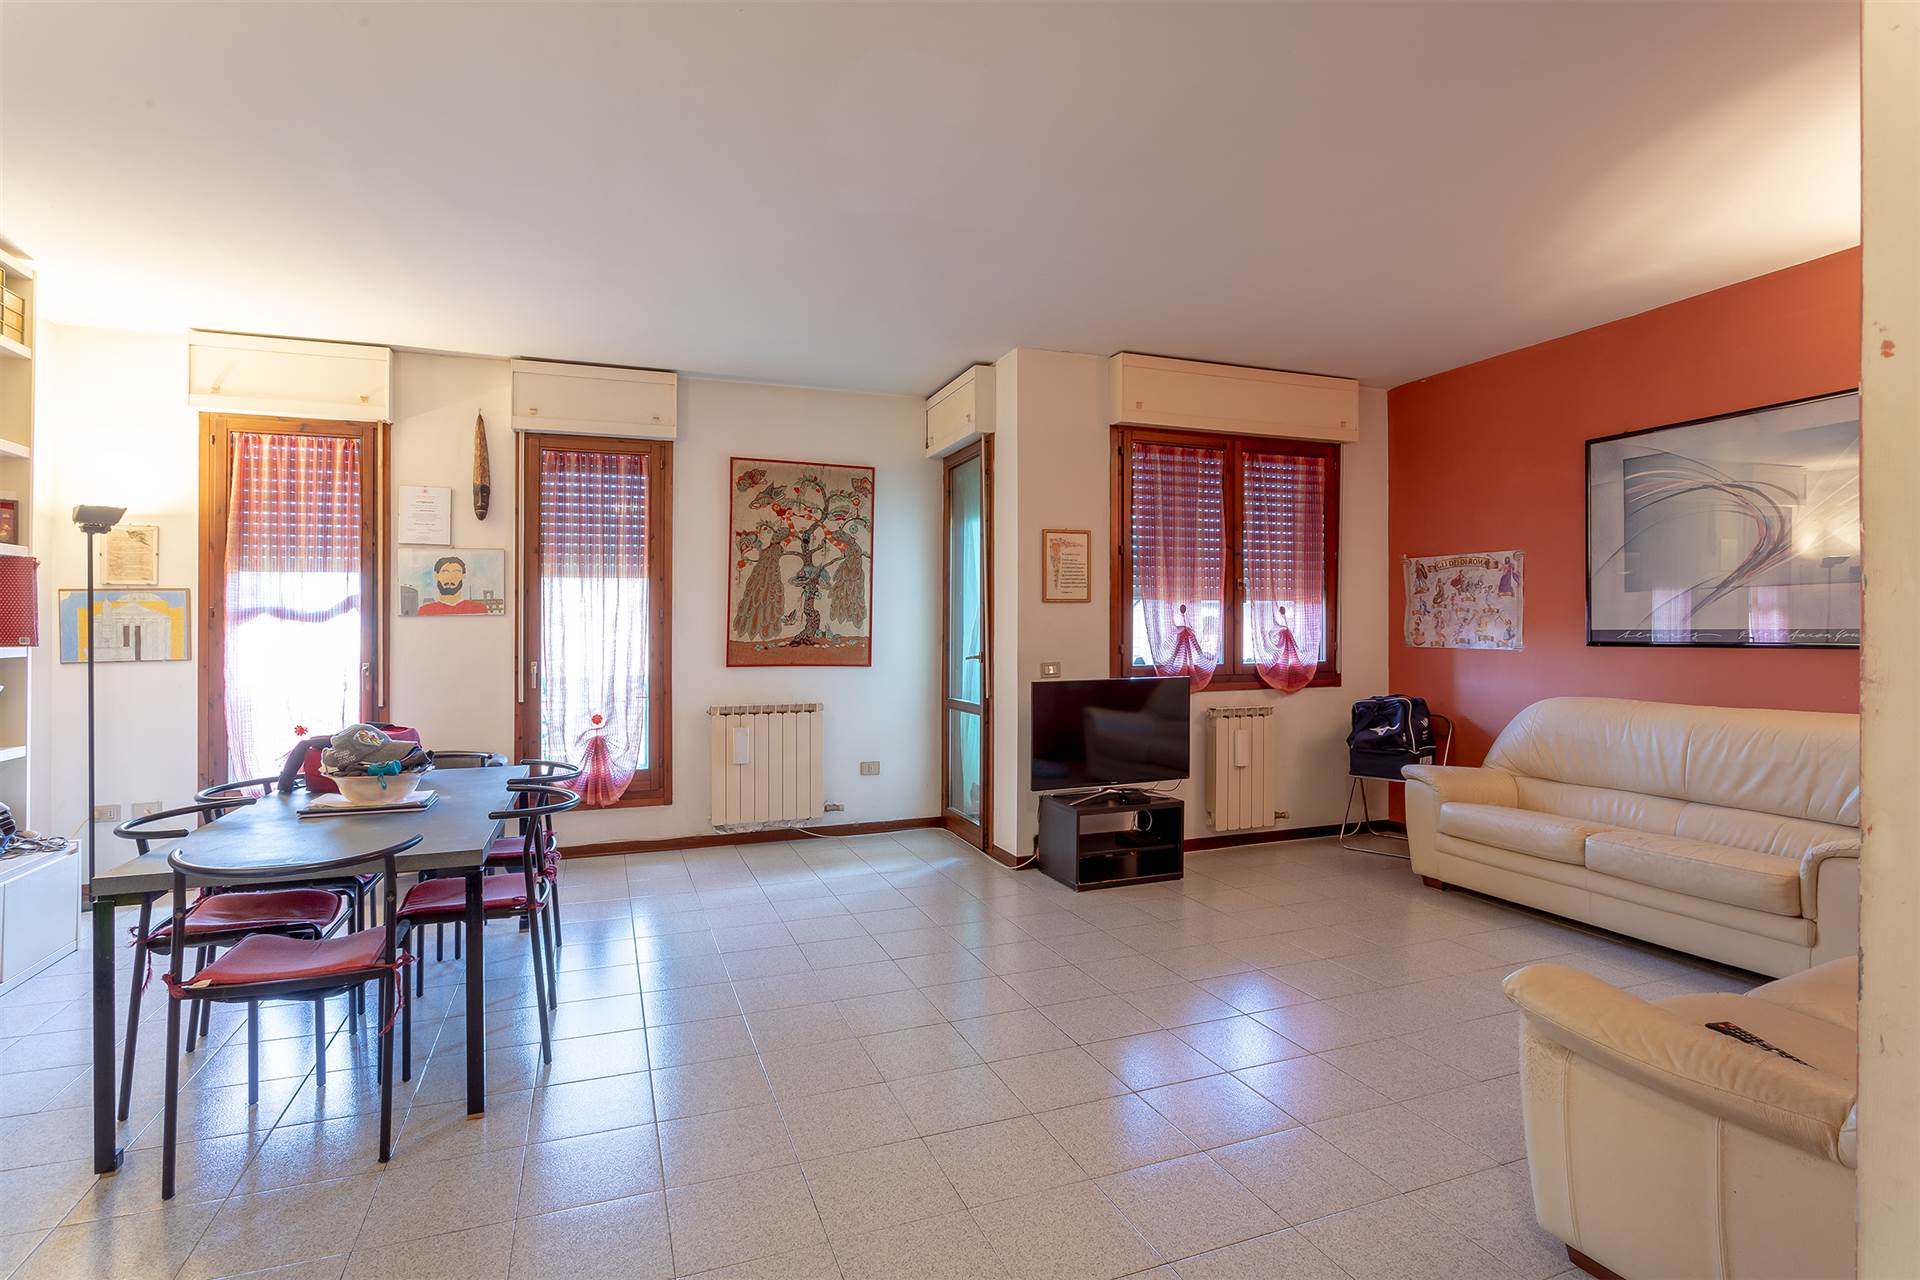 SAN DONNINO, CAMPI BISENZIO, Apartment for sale of 107 Sq. mt., Good condition, Heating Individual heating system, Energetic class: G, placed at 3° 